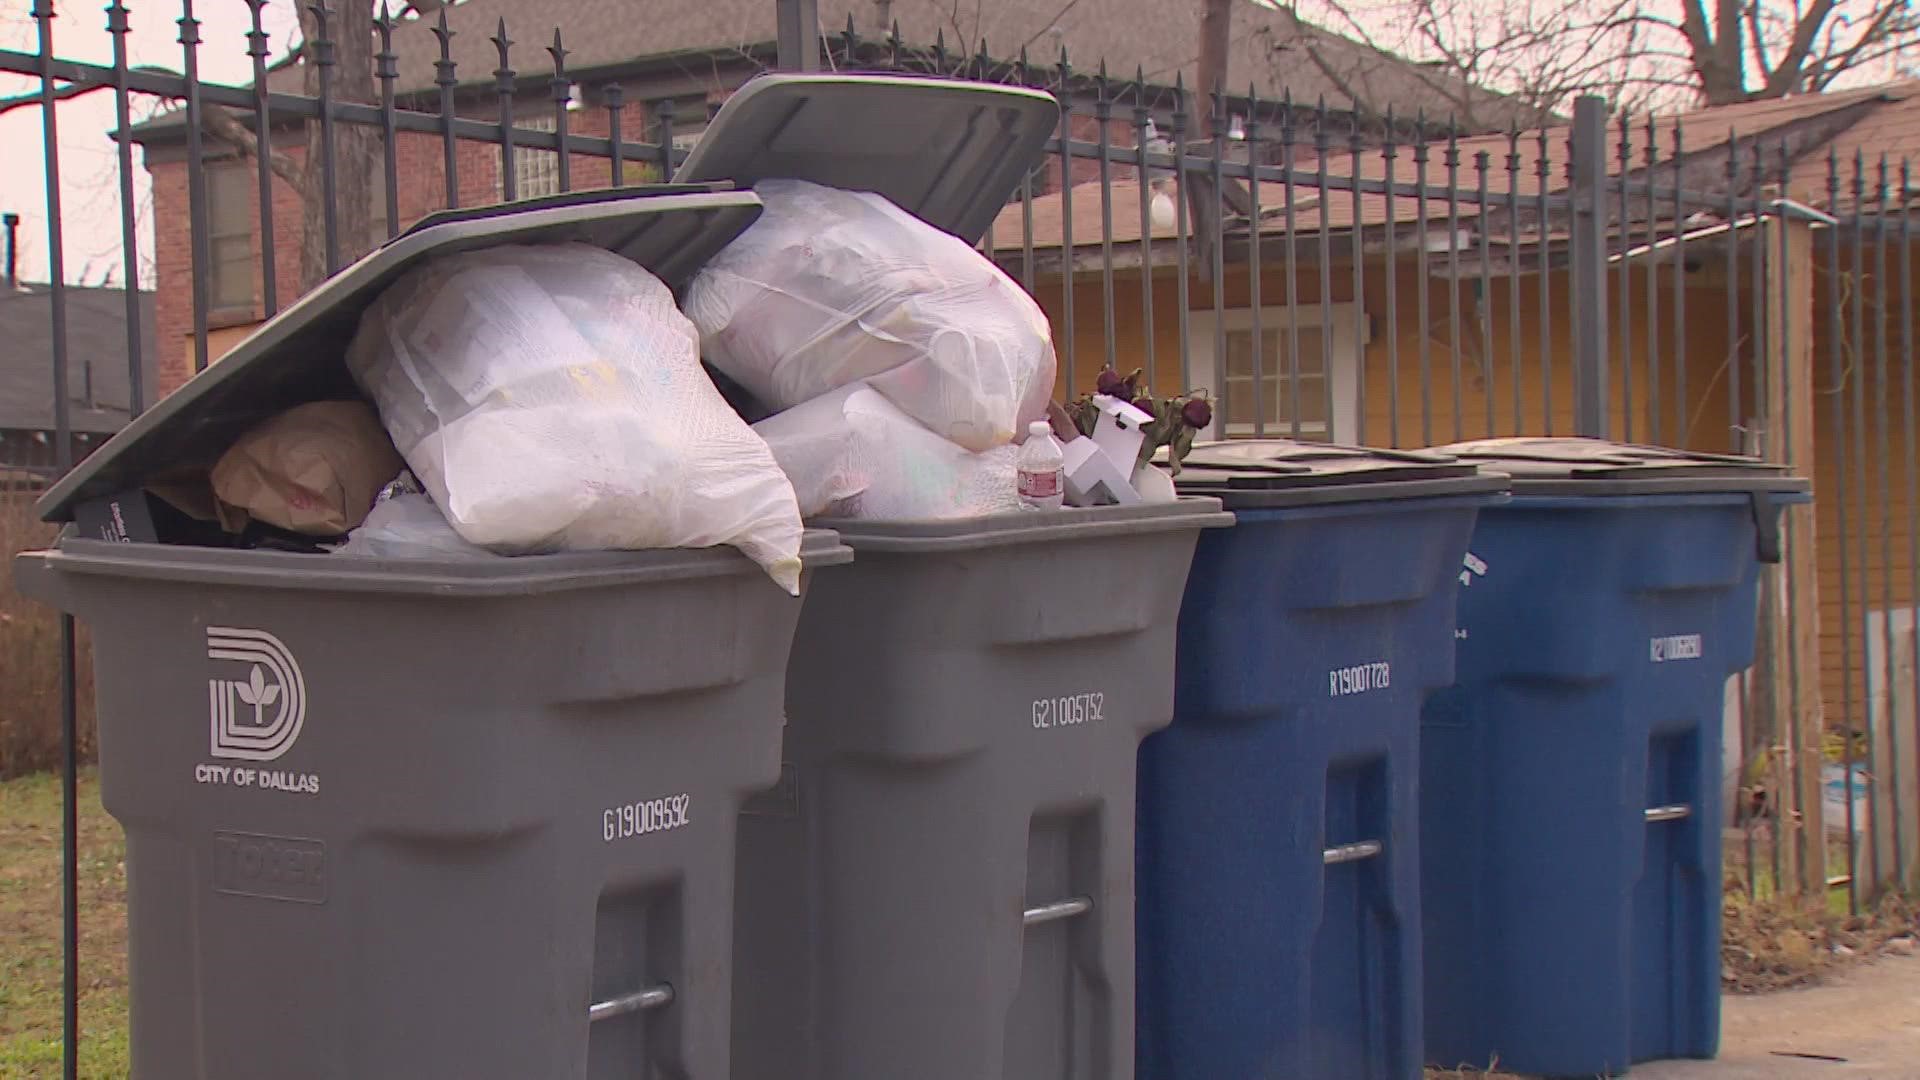 In December, the city changed to a new trash schedule, but officials have blamed weather and holidays for missed pickups